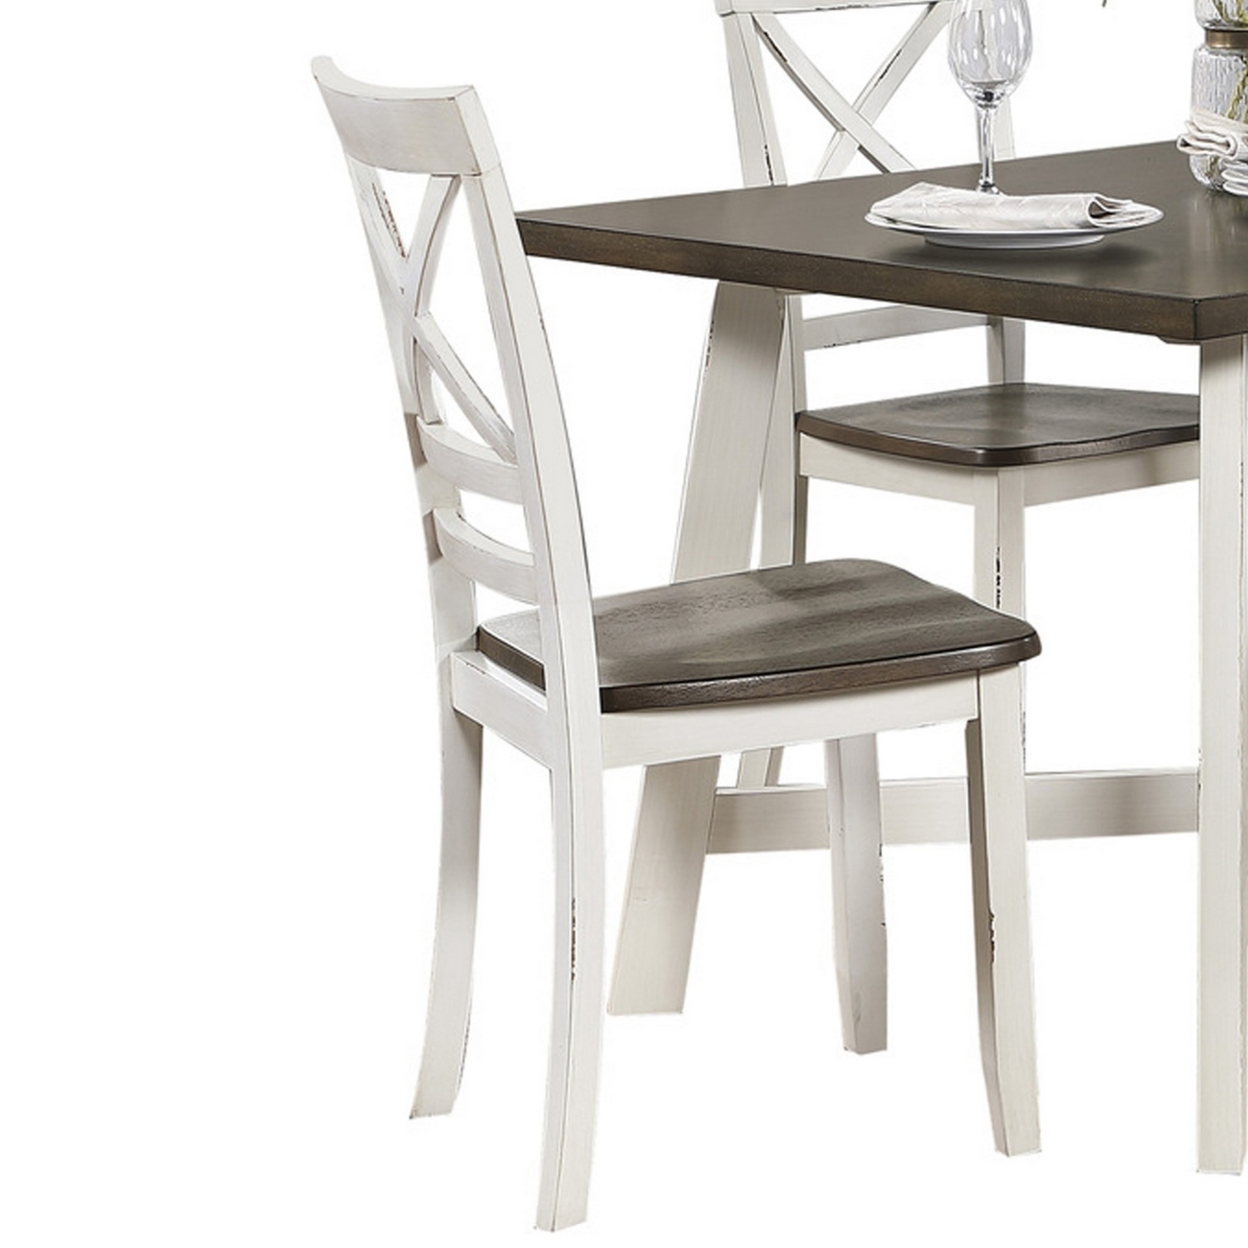 Transitional Style Wooden 5 Piece Dinette Set, Brown And White- Saltoro Sherpi